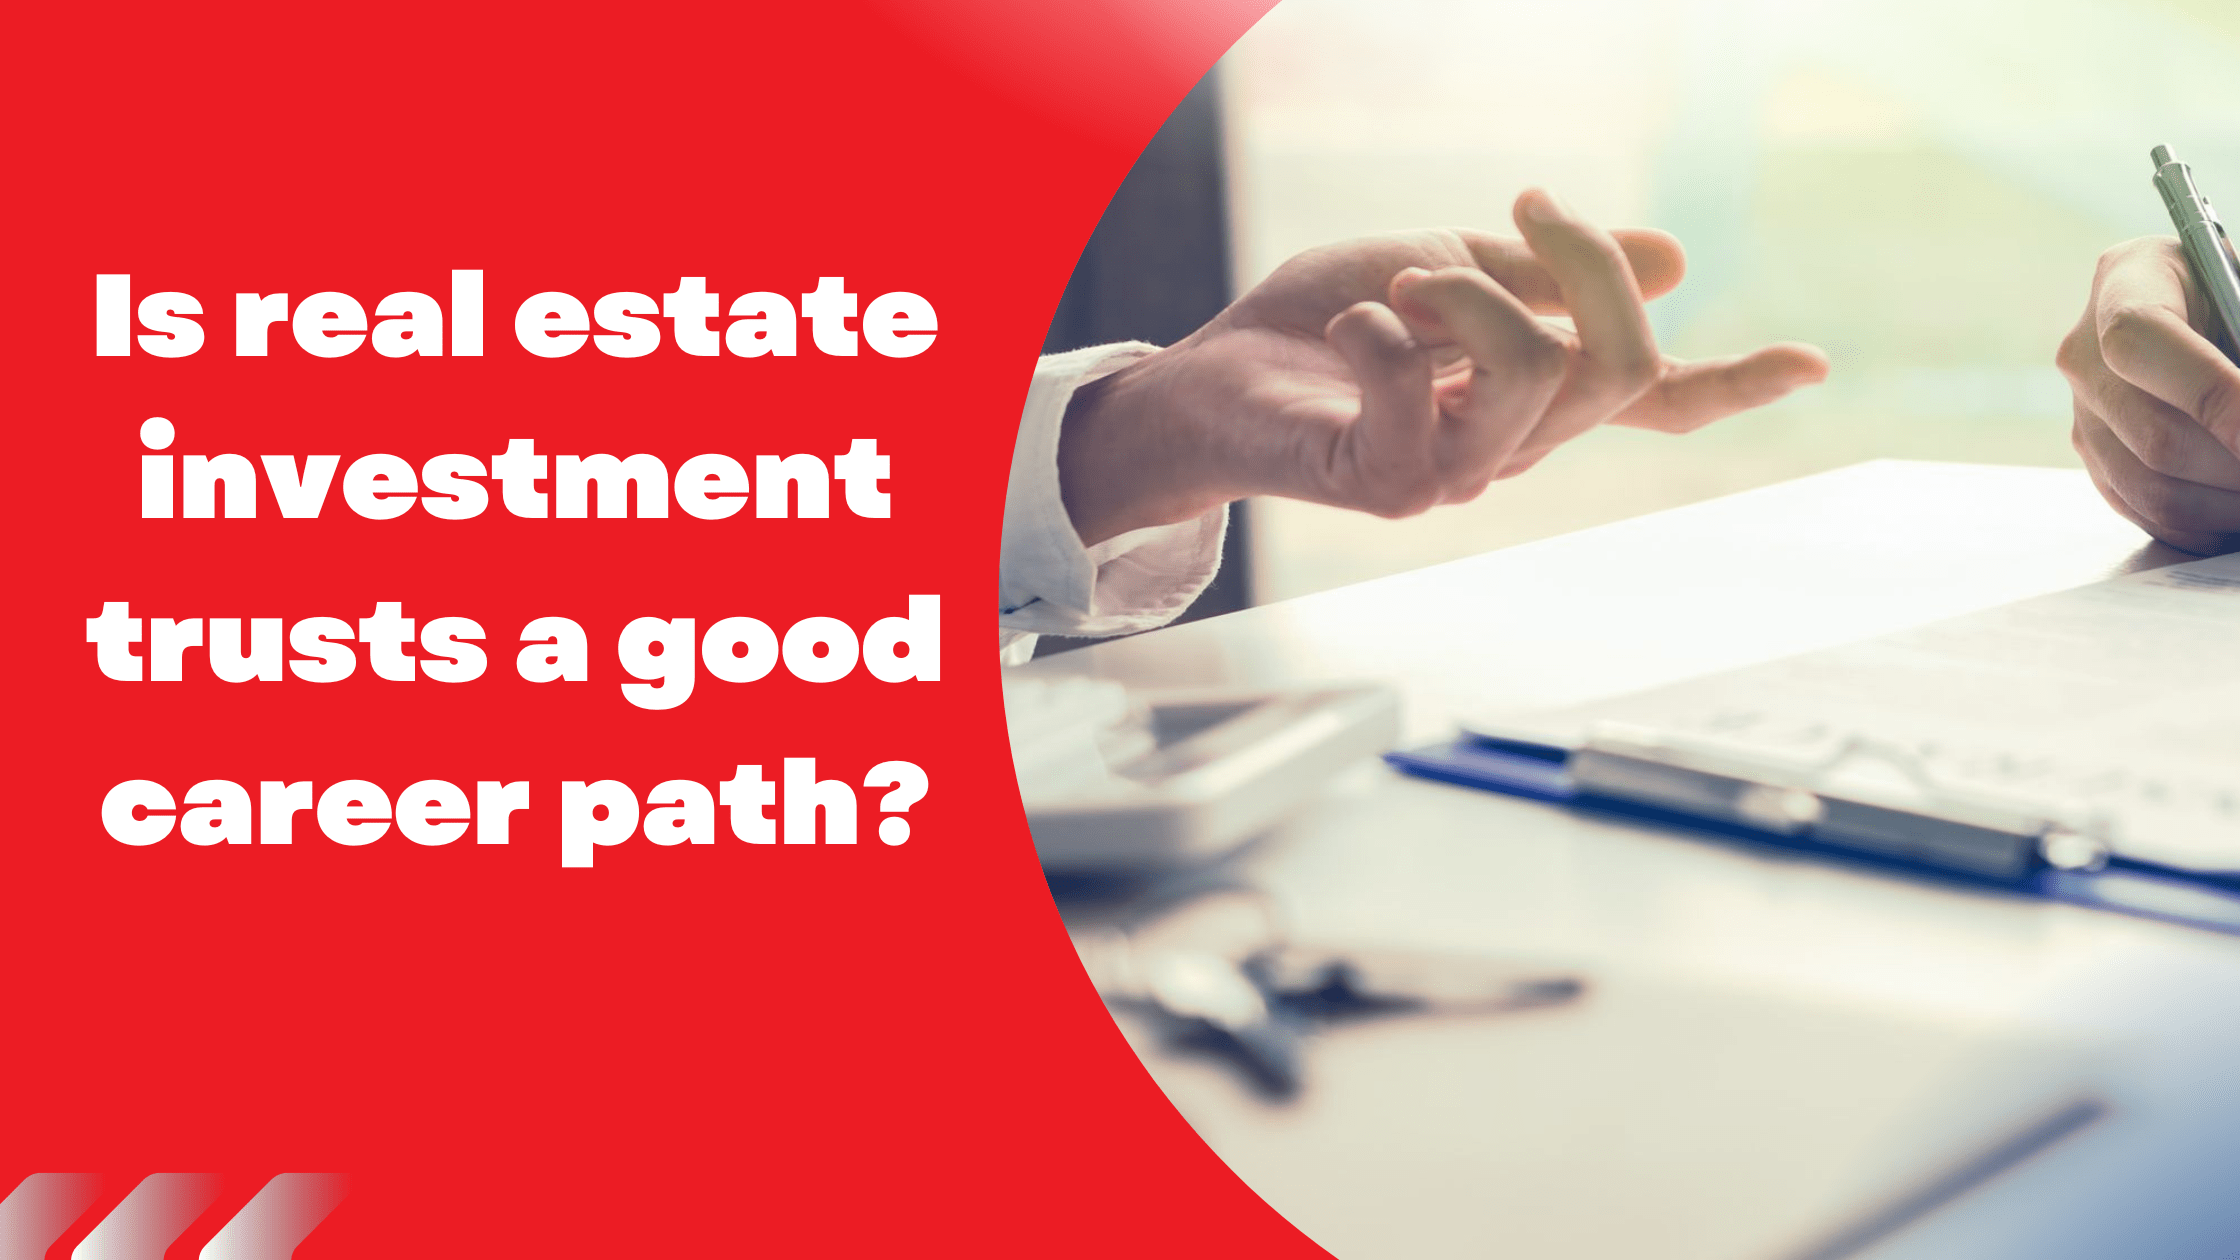 Is real estate investment trusts a good career path?